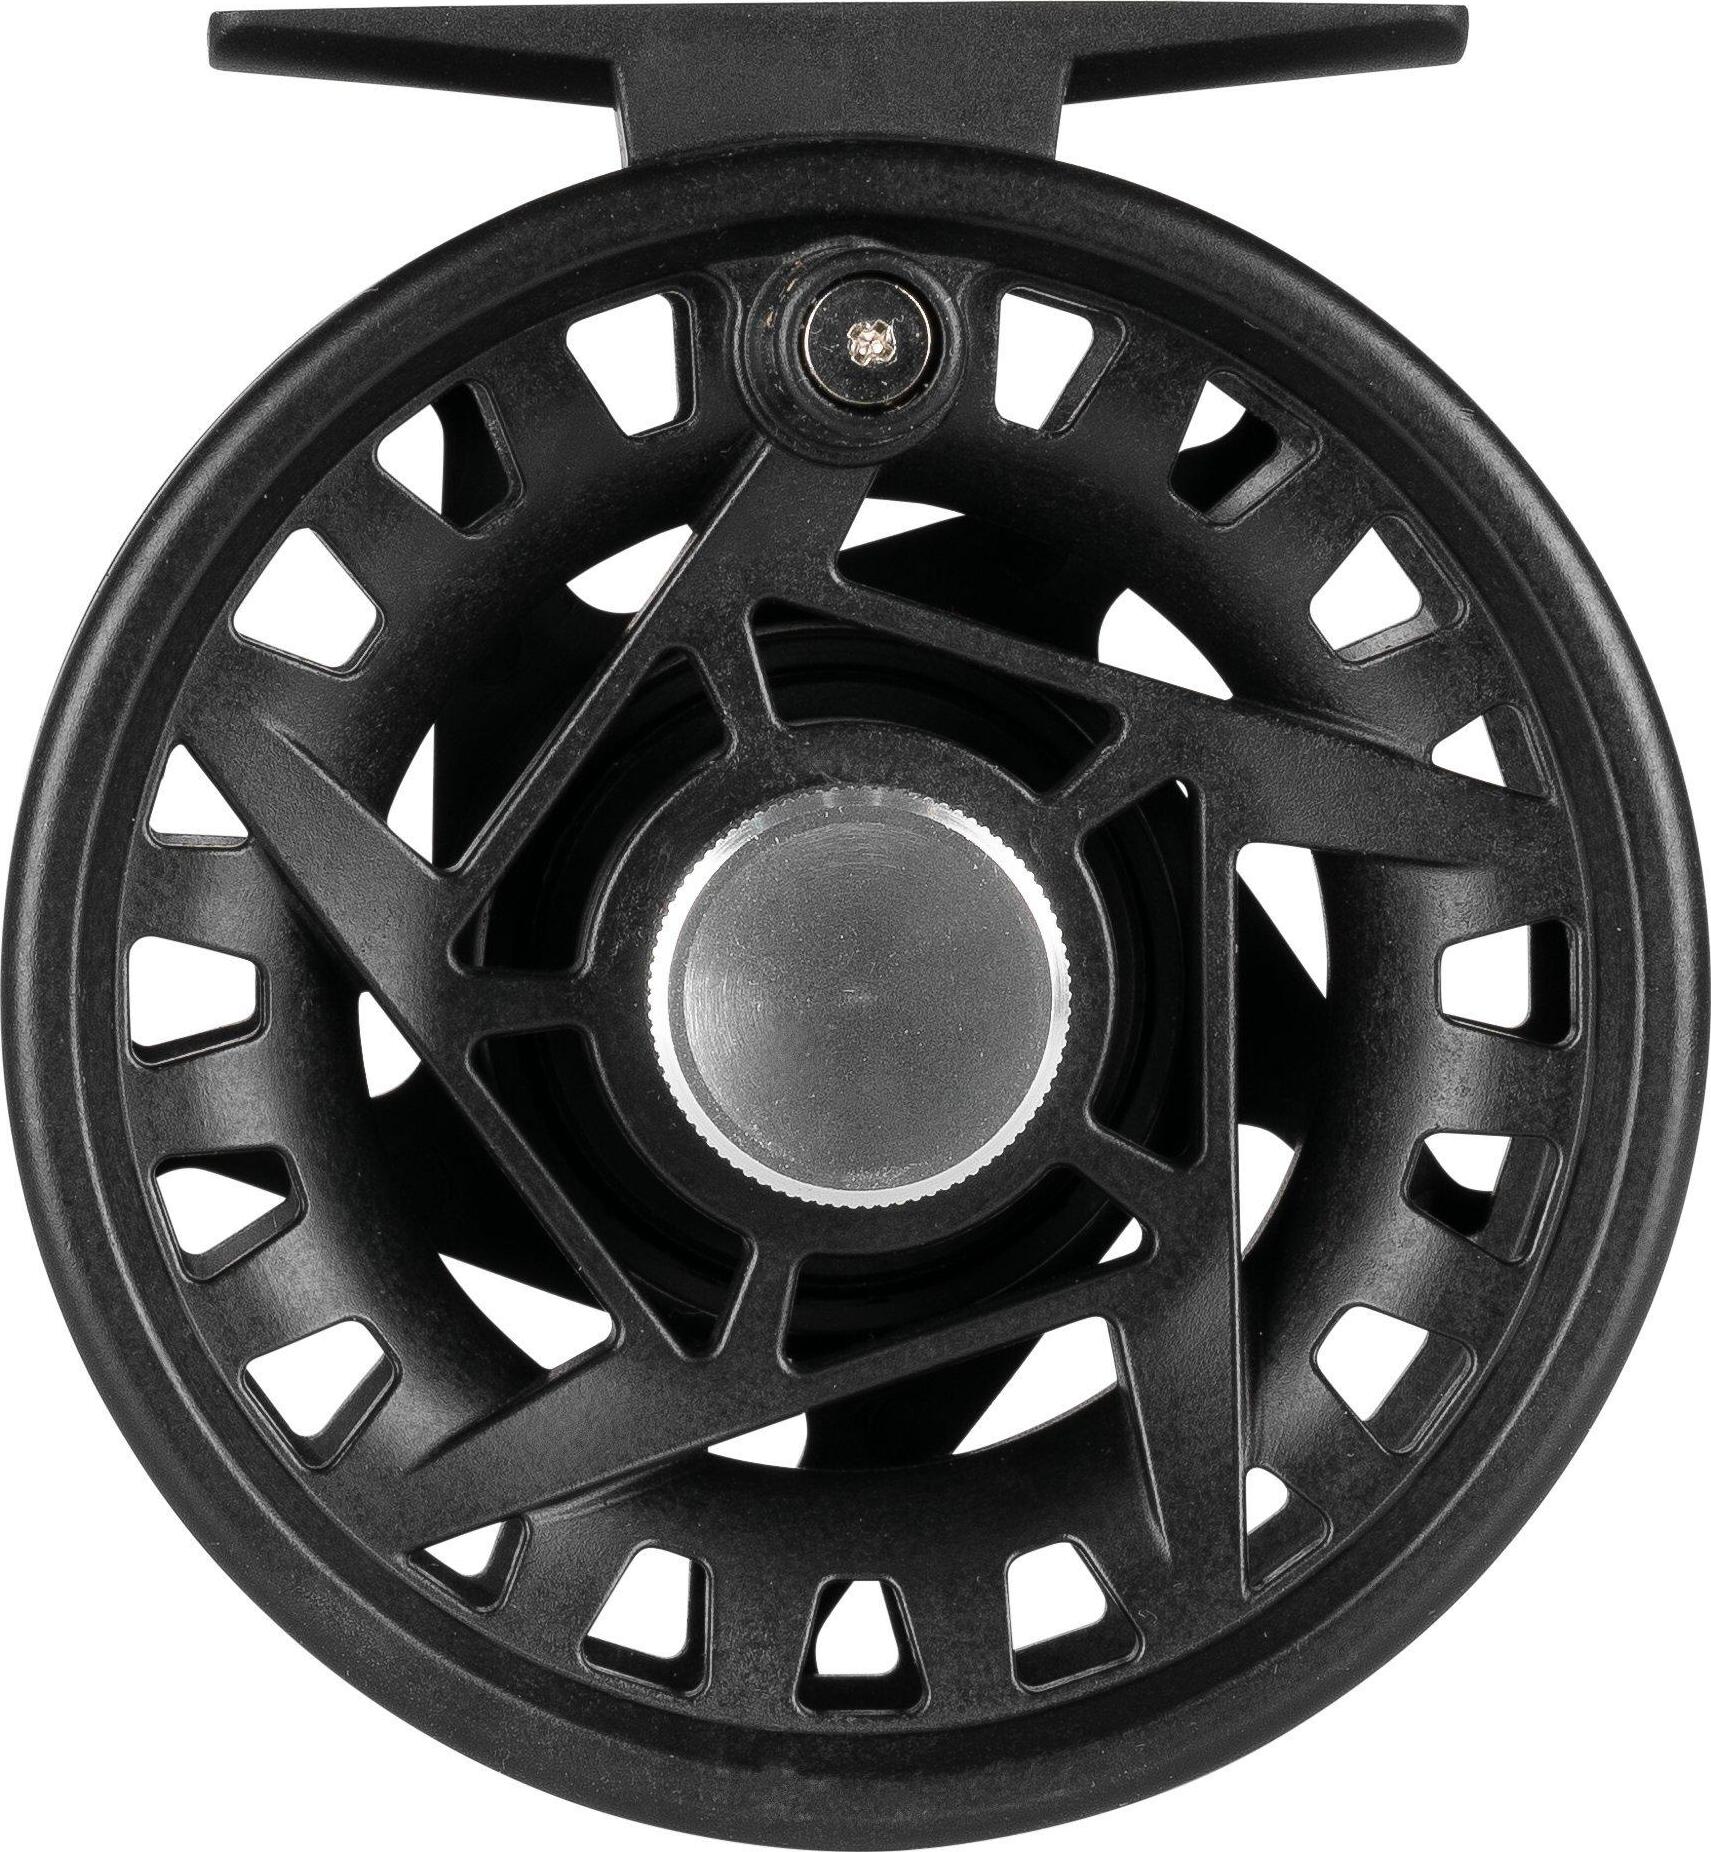 ROSS CANYON BIG Game 6 Fly Reel - Black with Neoprene Case, Box